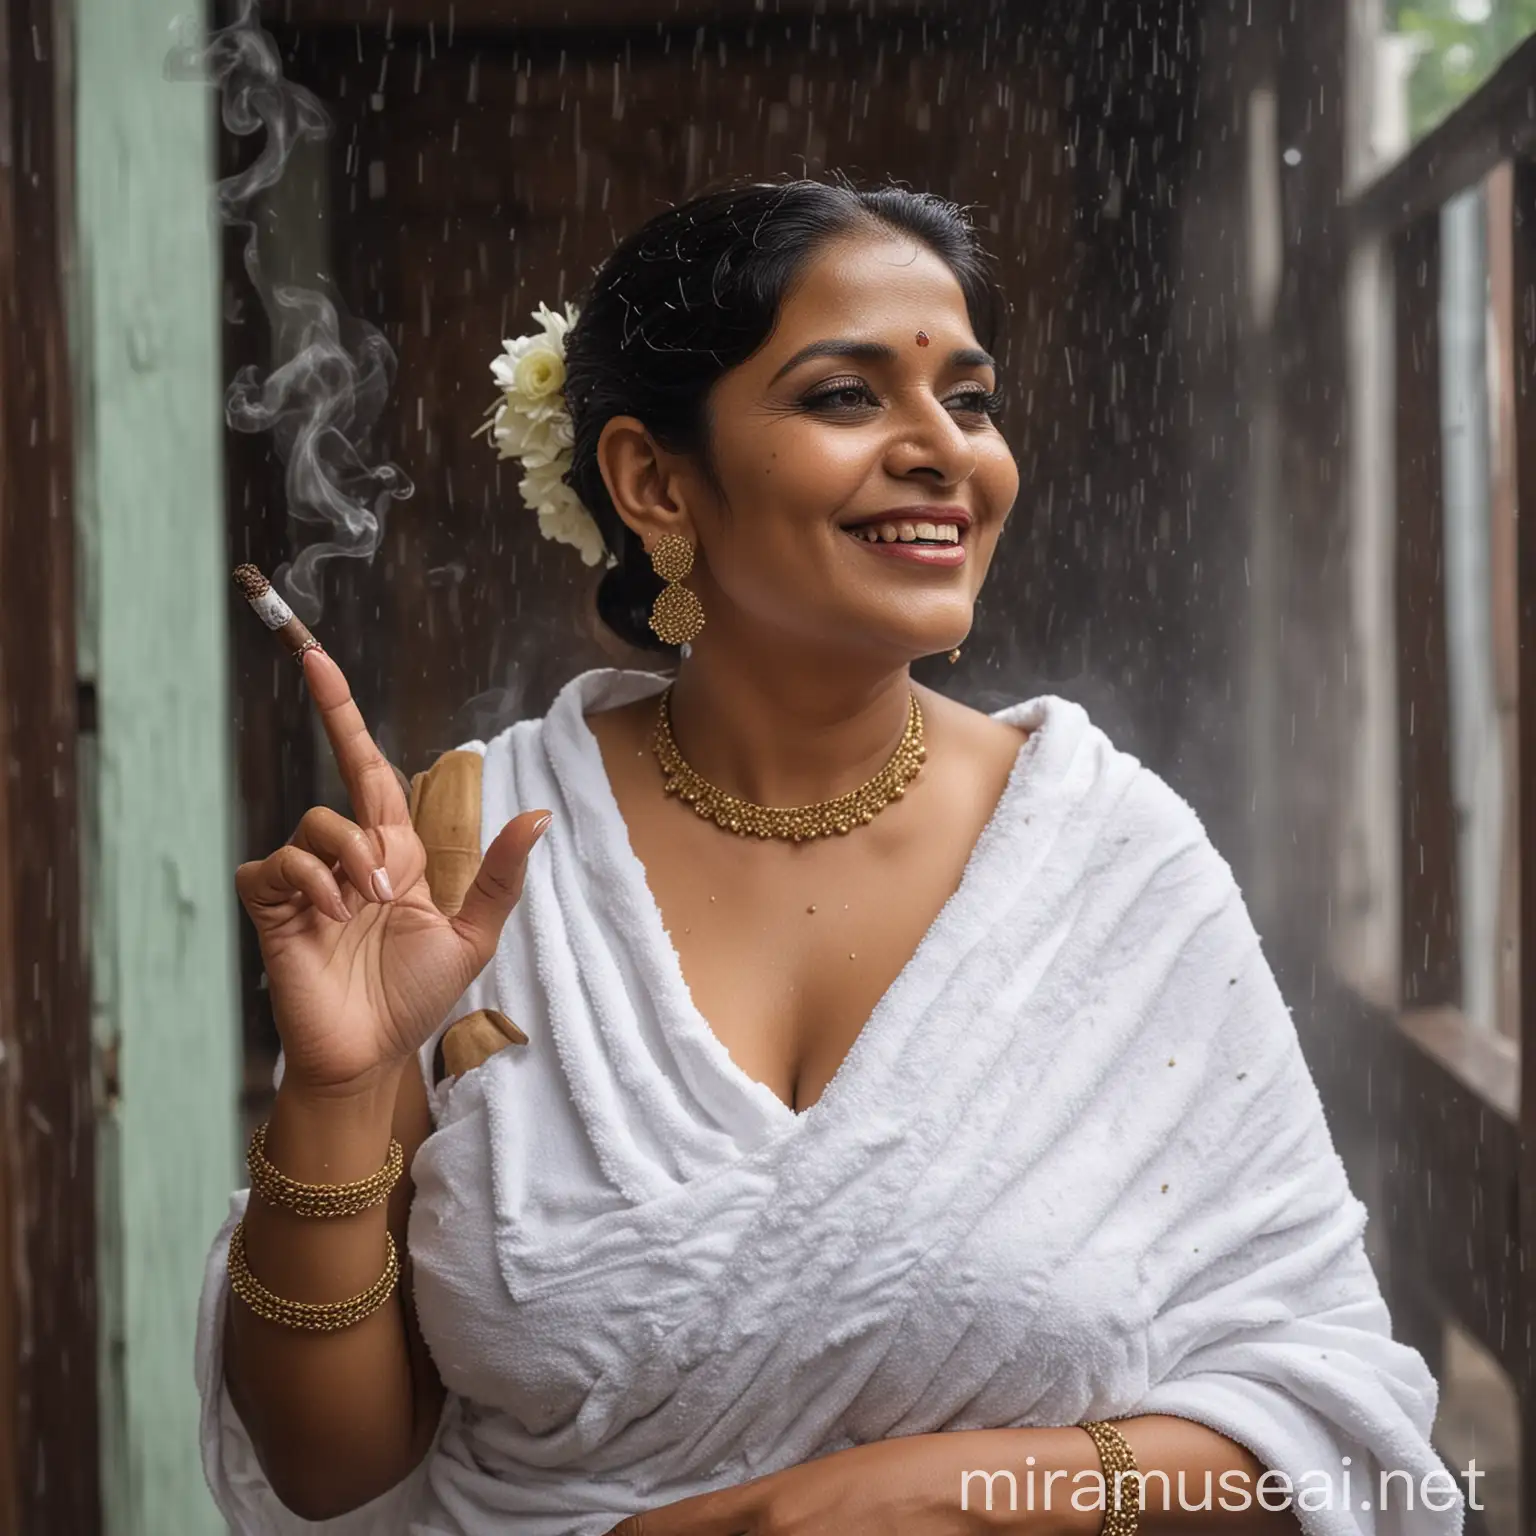 a indian mature  fat woman having big stomach age 57 years old attractive looks with make up on face ,binding her high volume hairs, Gajra Bun Hairstyle. wearing metal anklet on feet and high heels, smoking a cigar  in her hand  , smoke is coming out from cigar  . she is happy and smiling. she is wearing pearl neck lace in her neck , earrings in ears, a gold spectacles with chain holder on her eyes and wearing  only a  white bath towel on her body. she is marching  in a luxurious porch  and enjoying the rain  ,   a muscular man is in background with blur, three black cats are near her  and its day time . its raining very heavy .